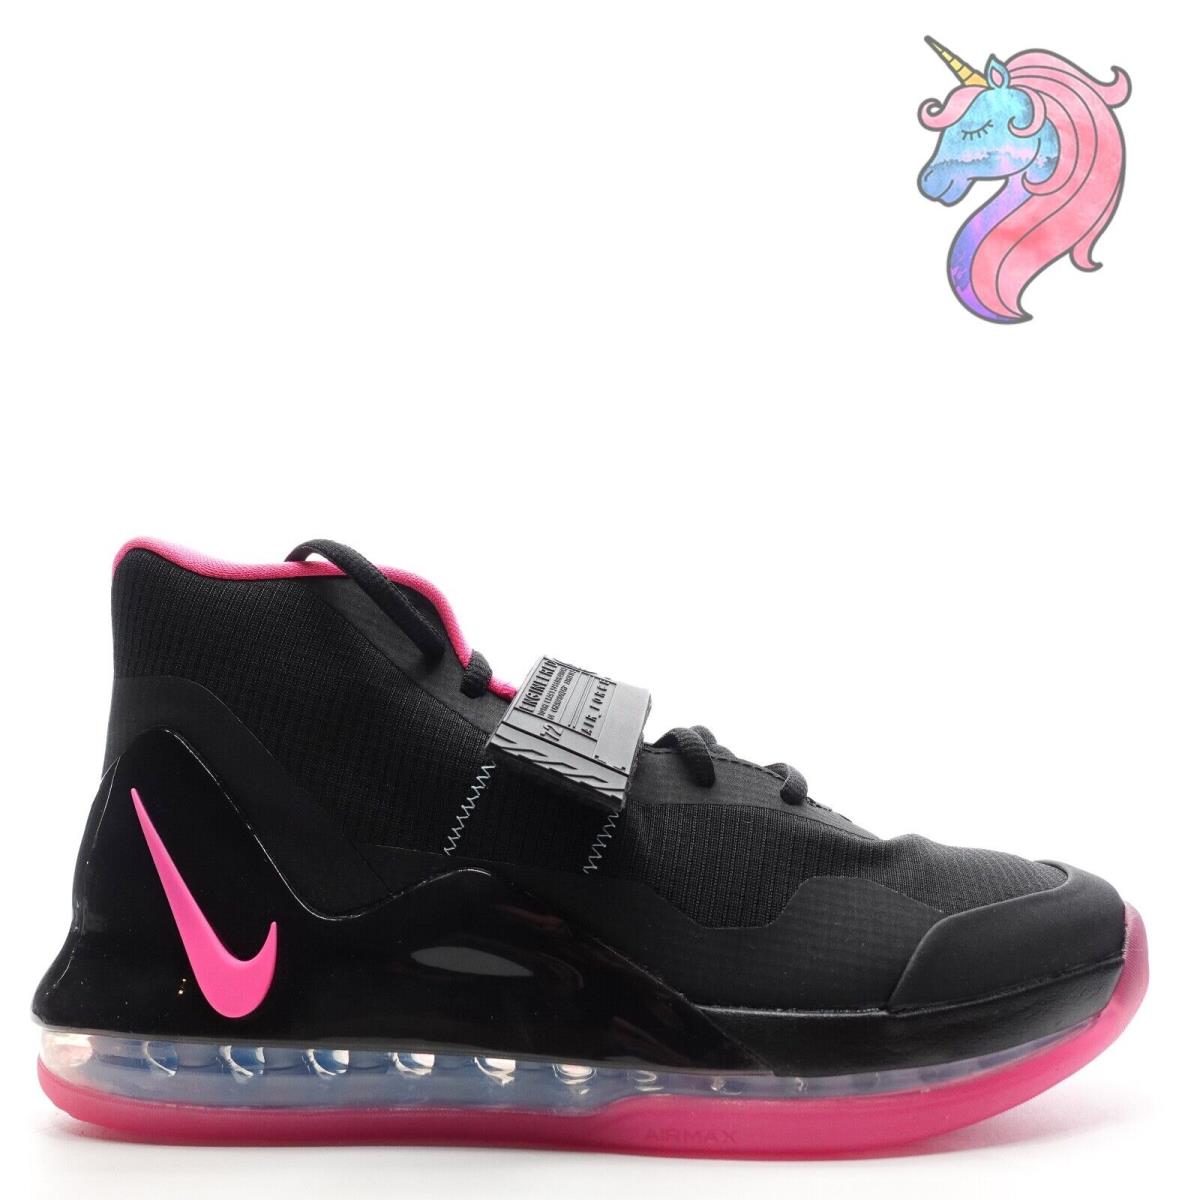 Nike Air Force Max Black Pink Basketball Shoes Mens Size 8 AR0974-004 Womens 9.5